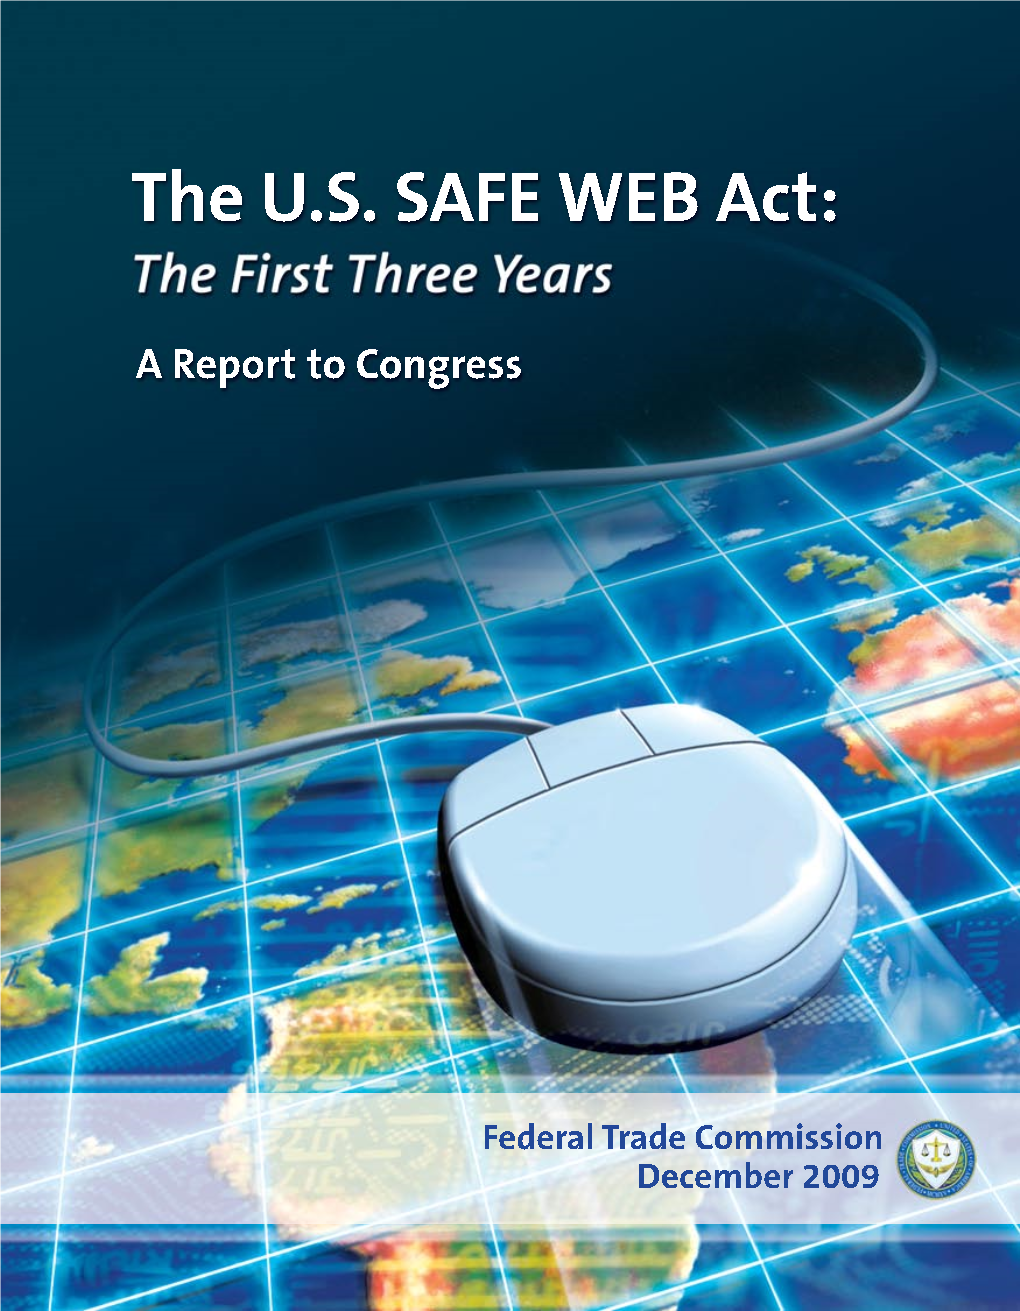 U.S. SAFE WEB Act: the First Three Years, a Report to Congress